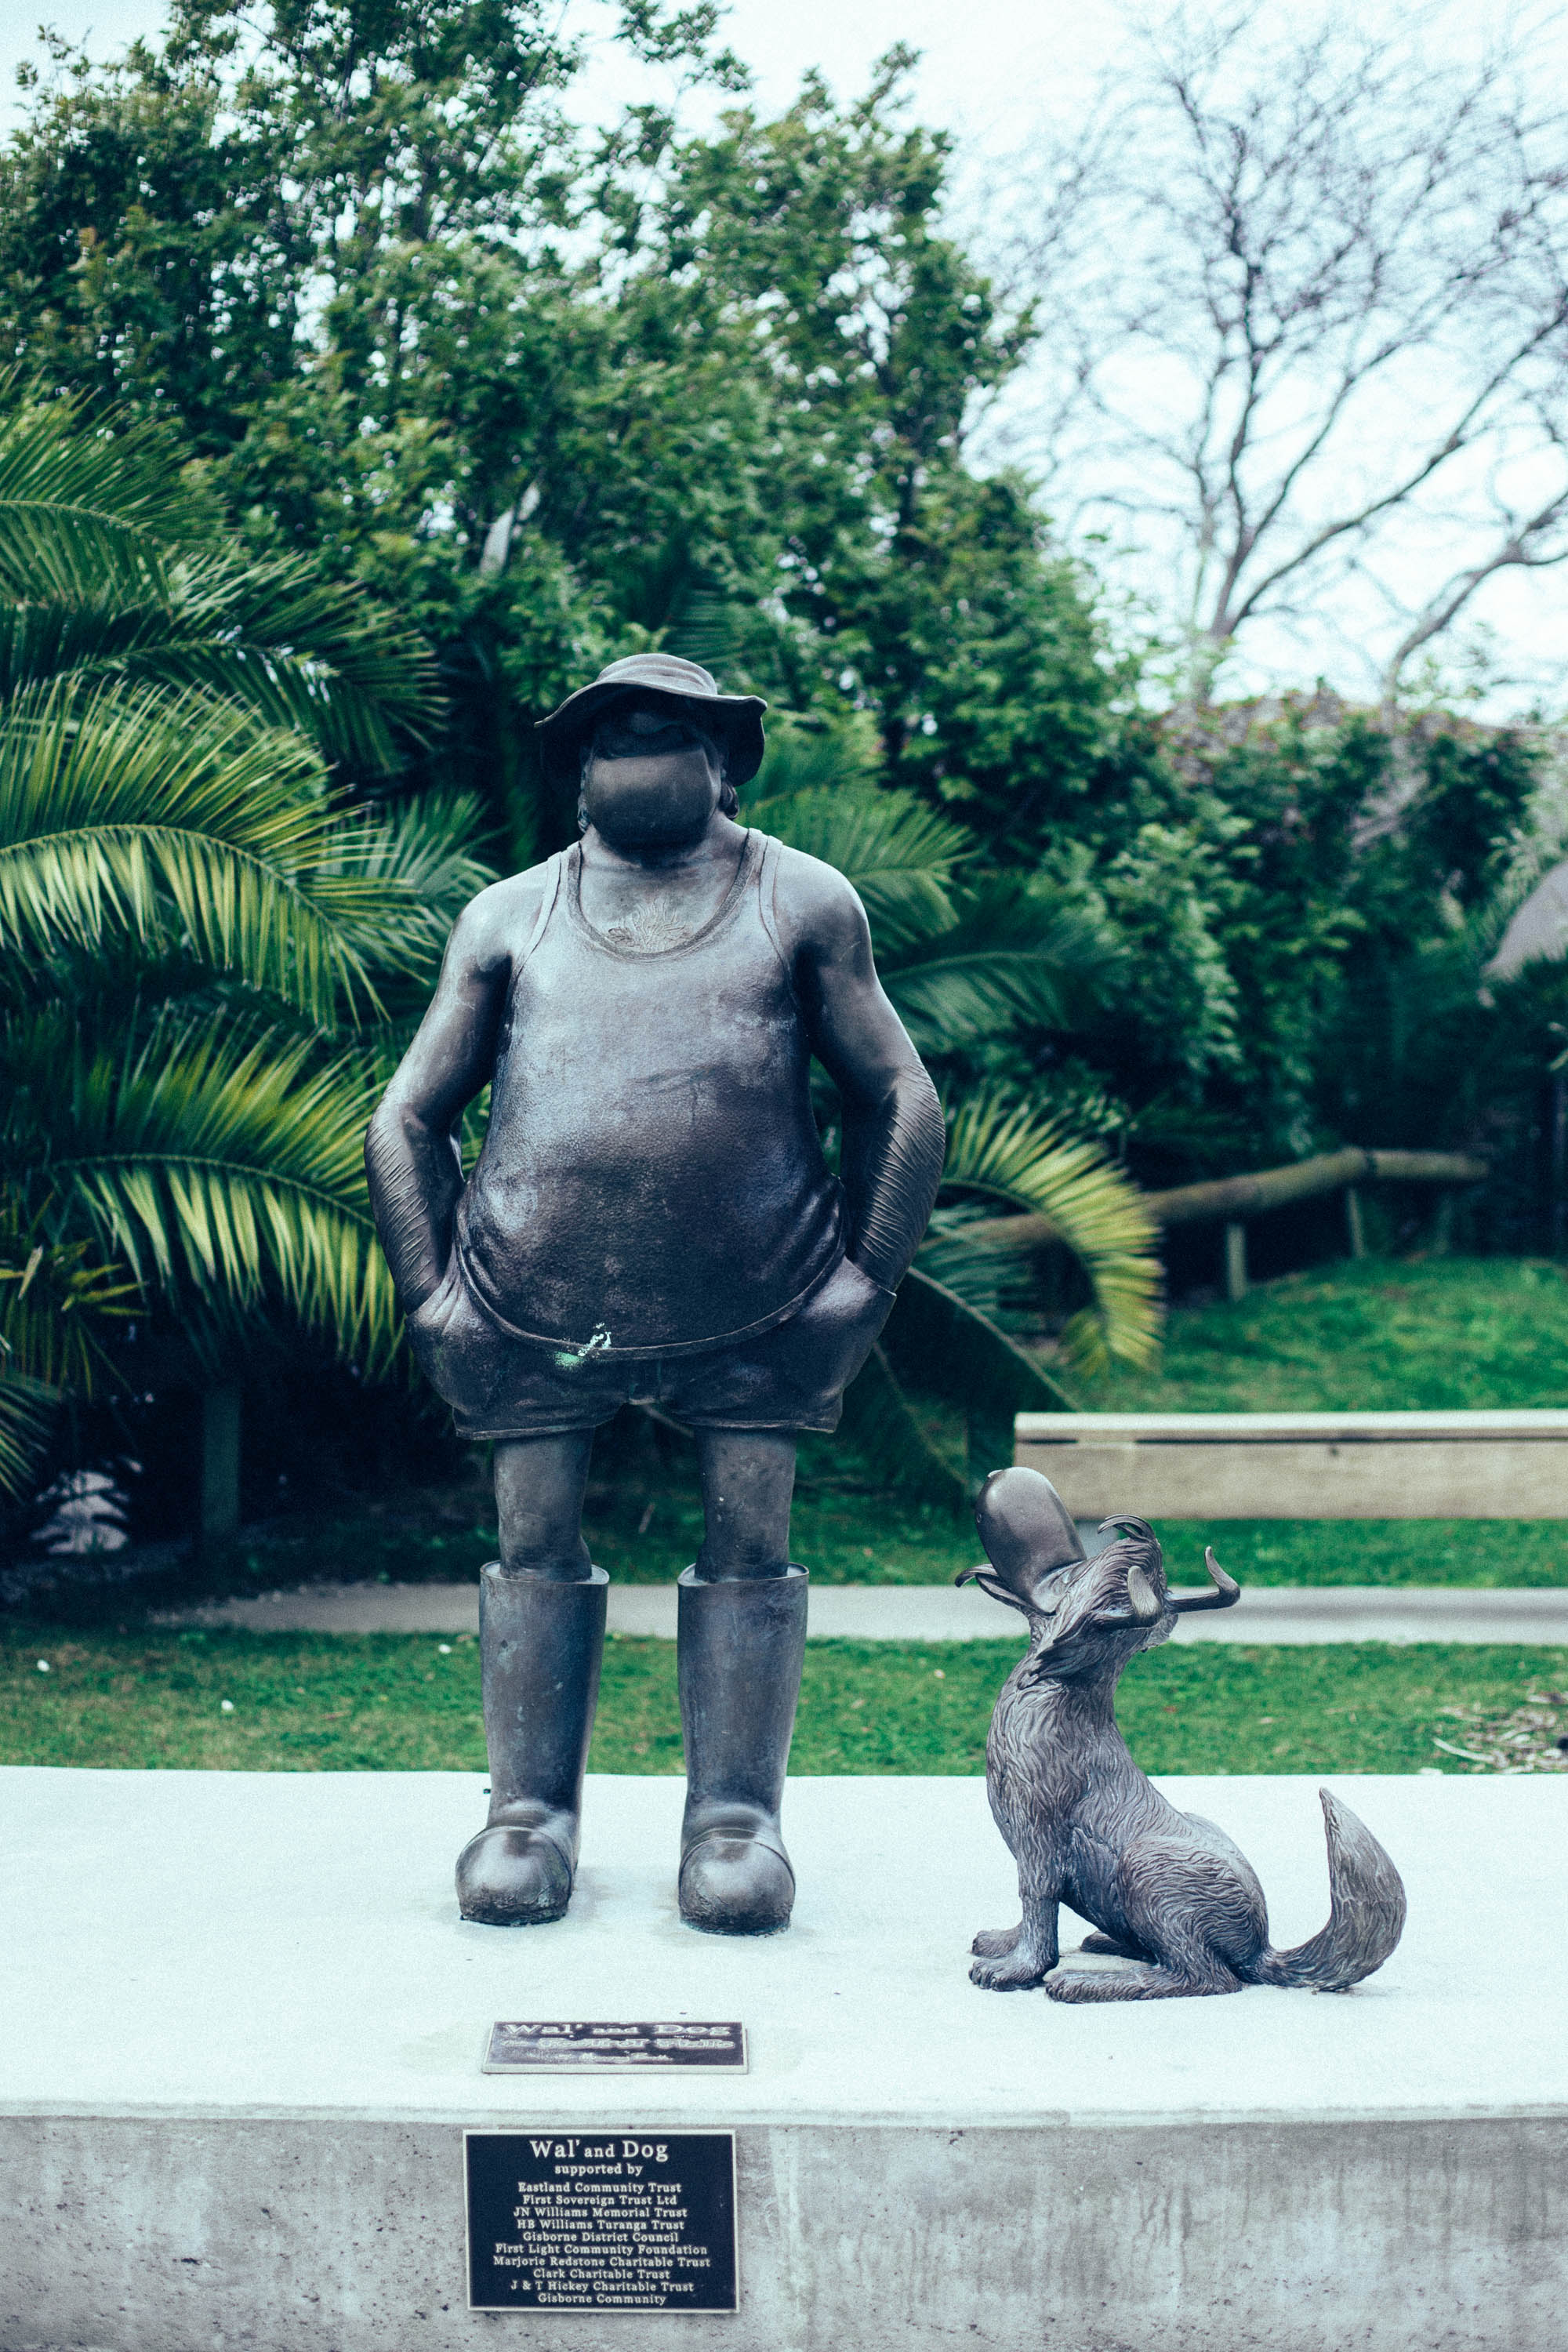 Wal & Dog sculpture outside the library in Gisborne, NZ